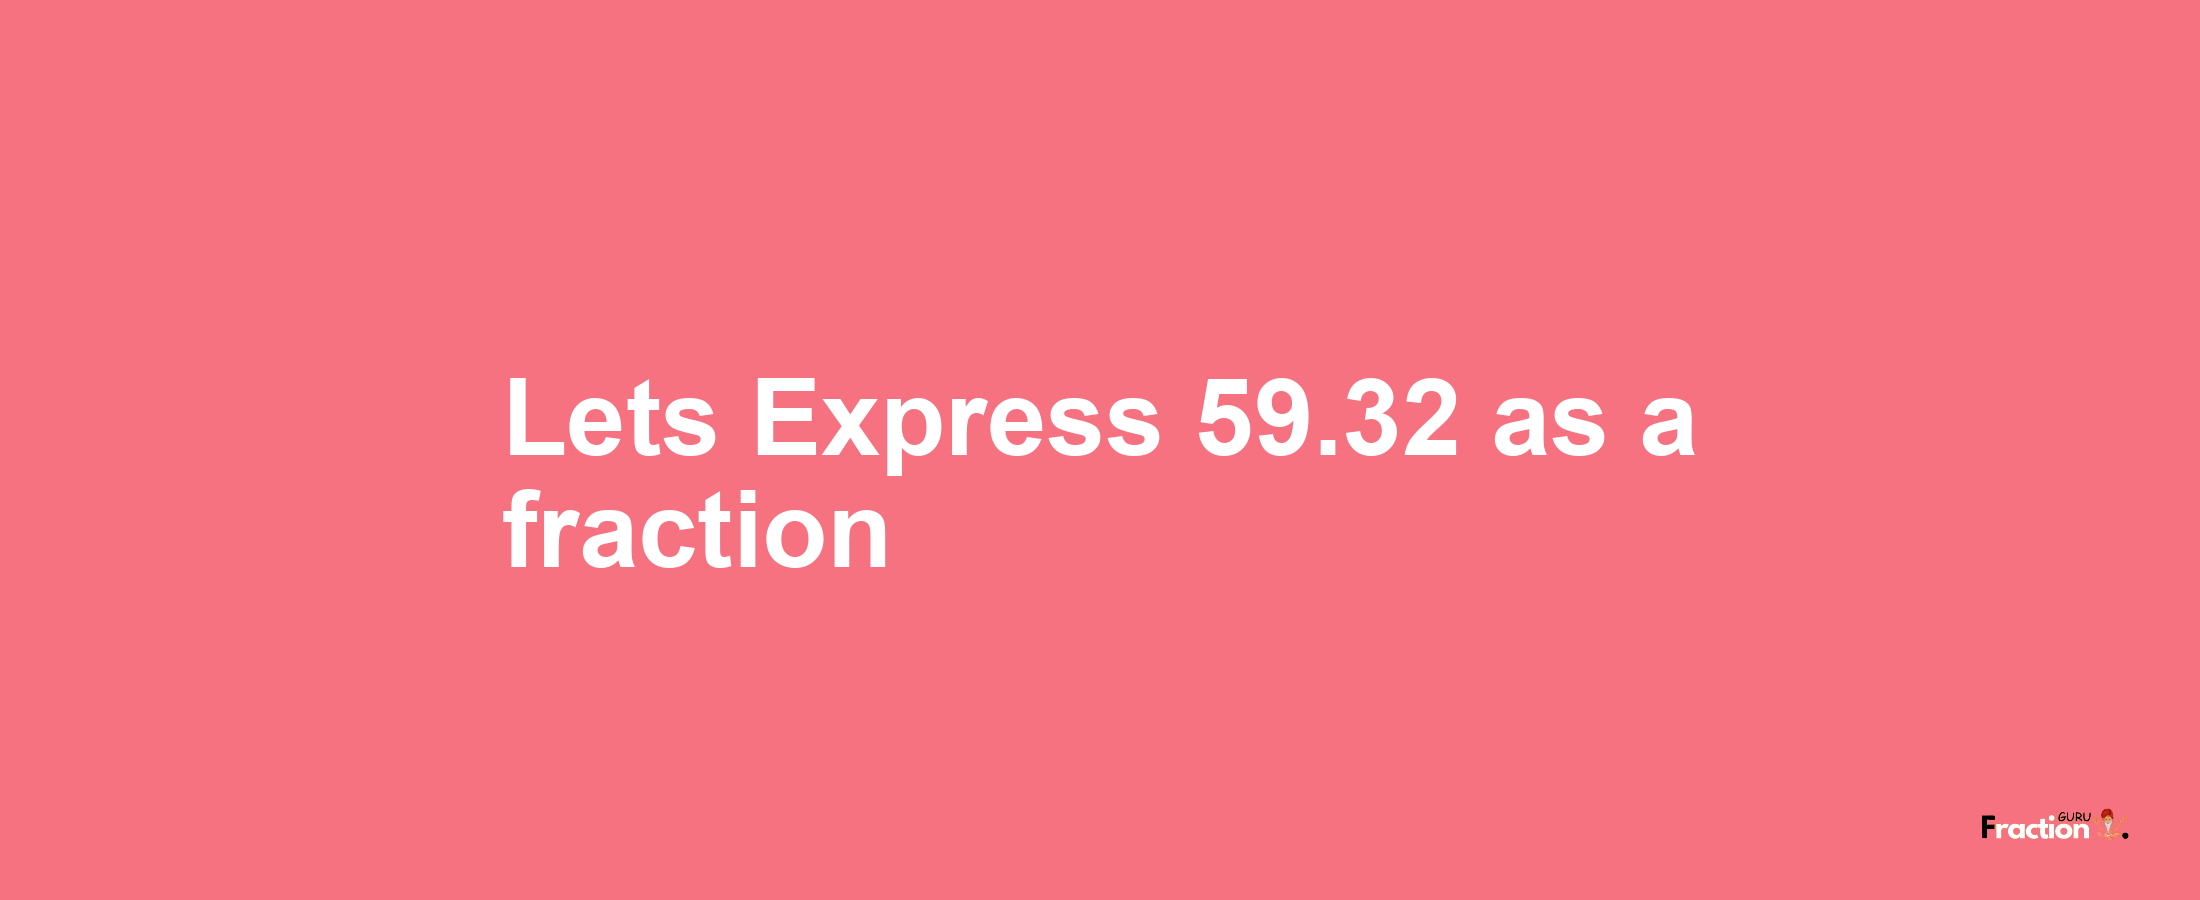 Lets Express 59.32 as afraction